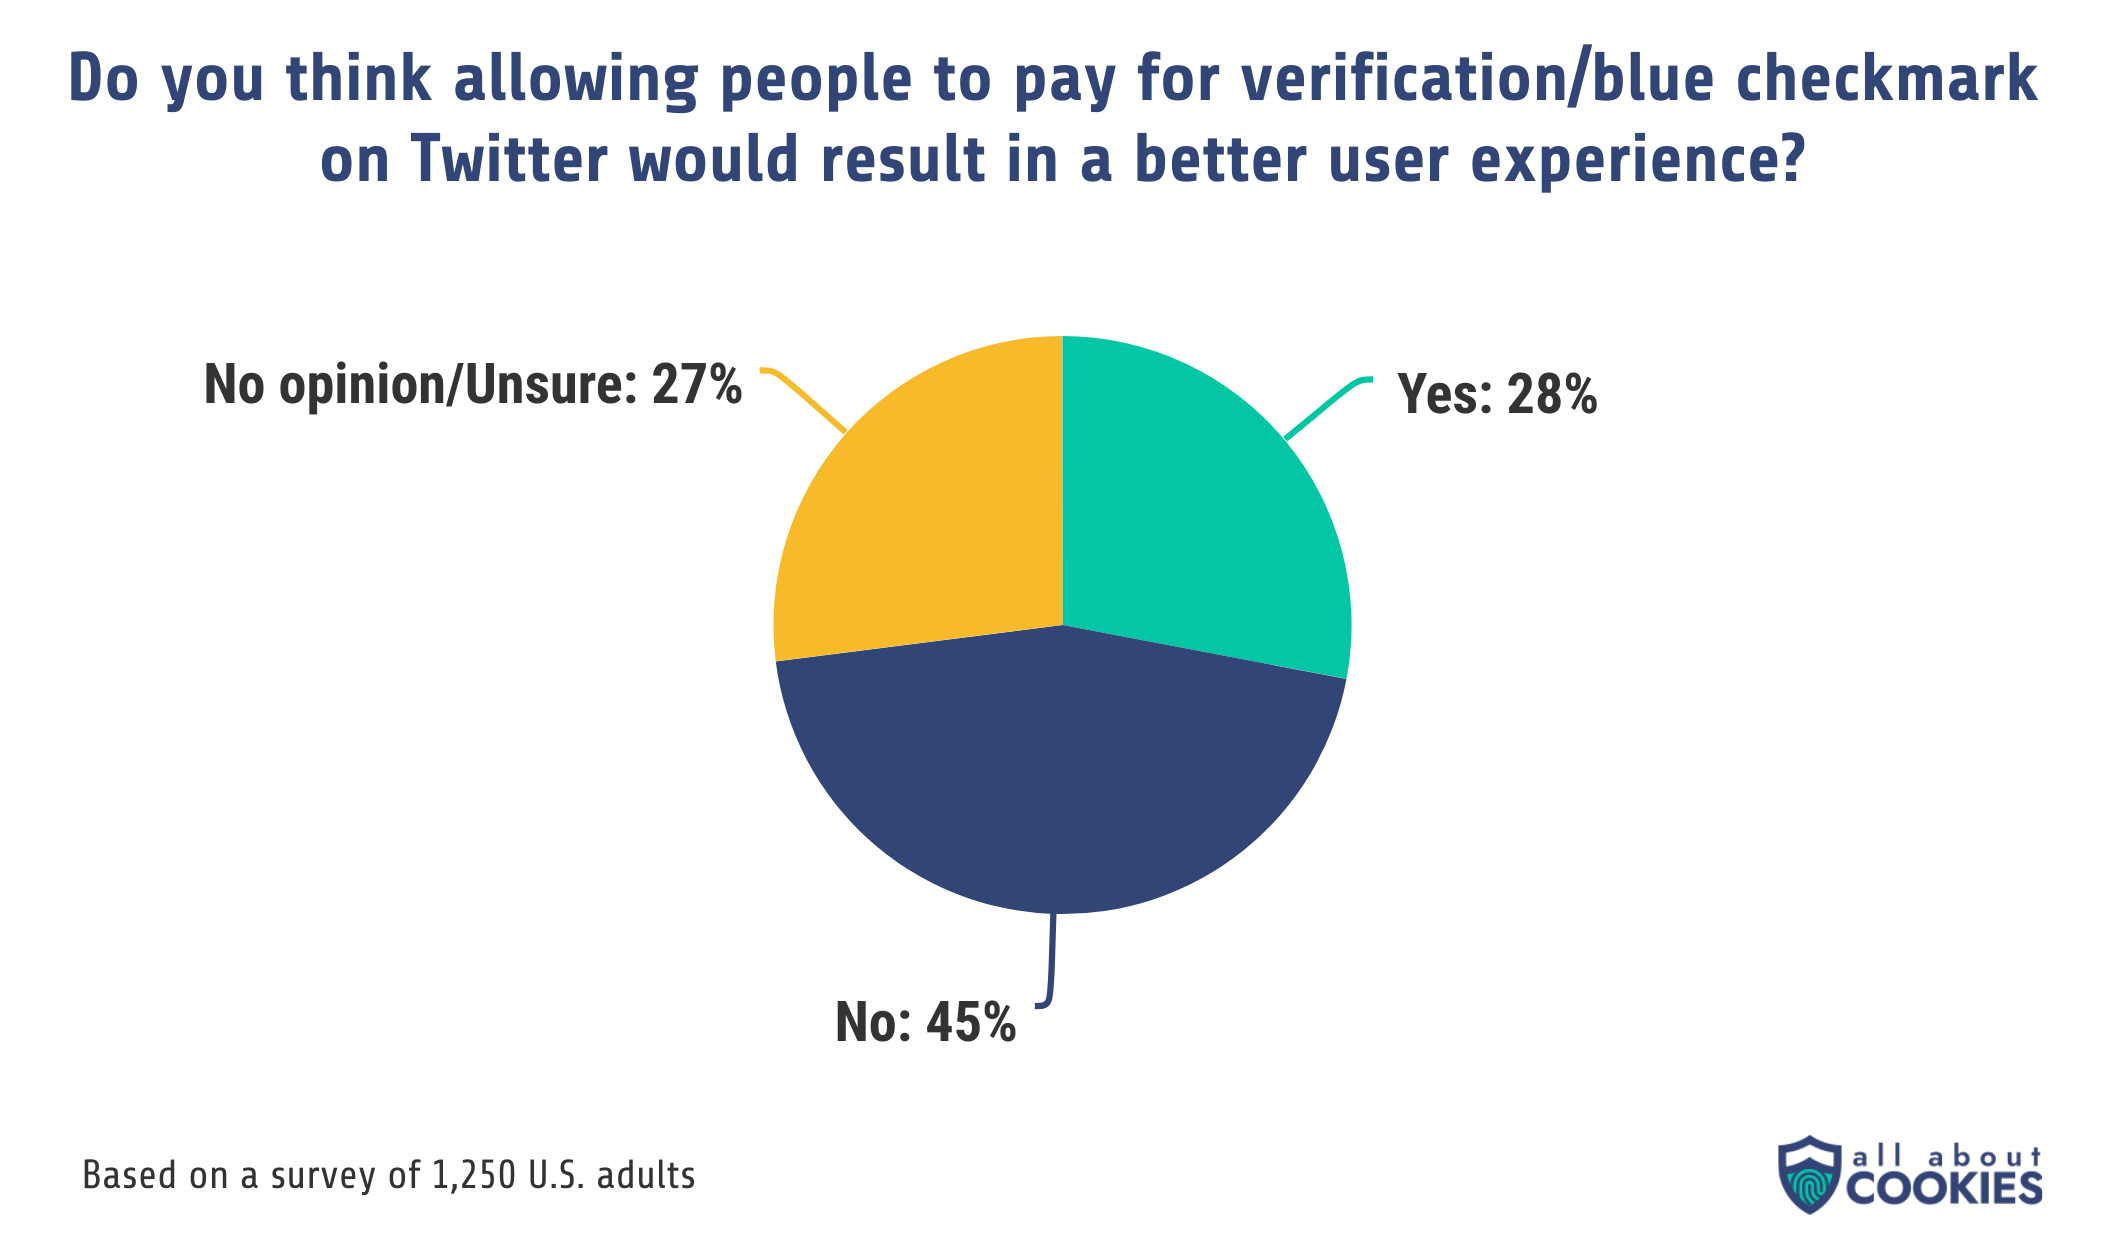 45% of U.S. adults think requiring payment for Twitter's blue verification checkmark wouldn't result in a better experience on the platform.